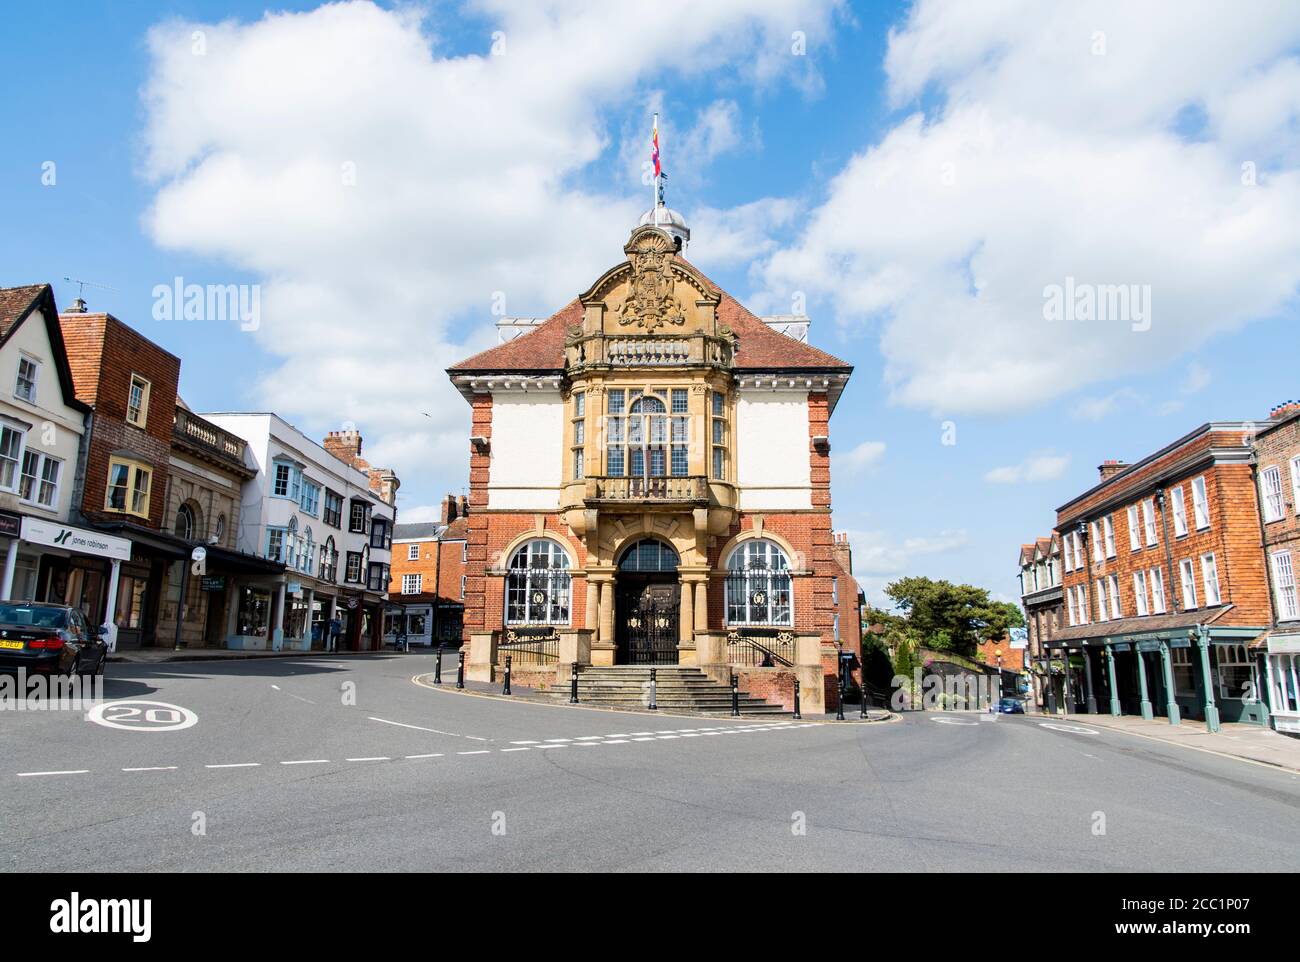 Marlborough town hall on the high street where markets are held Stock Photo